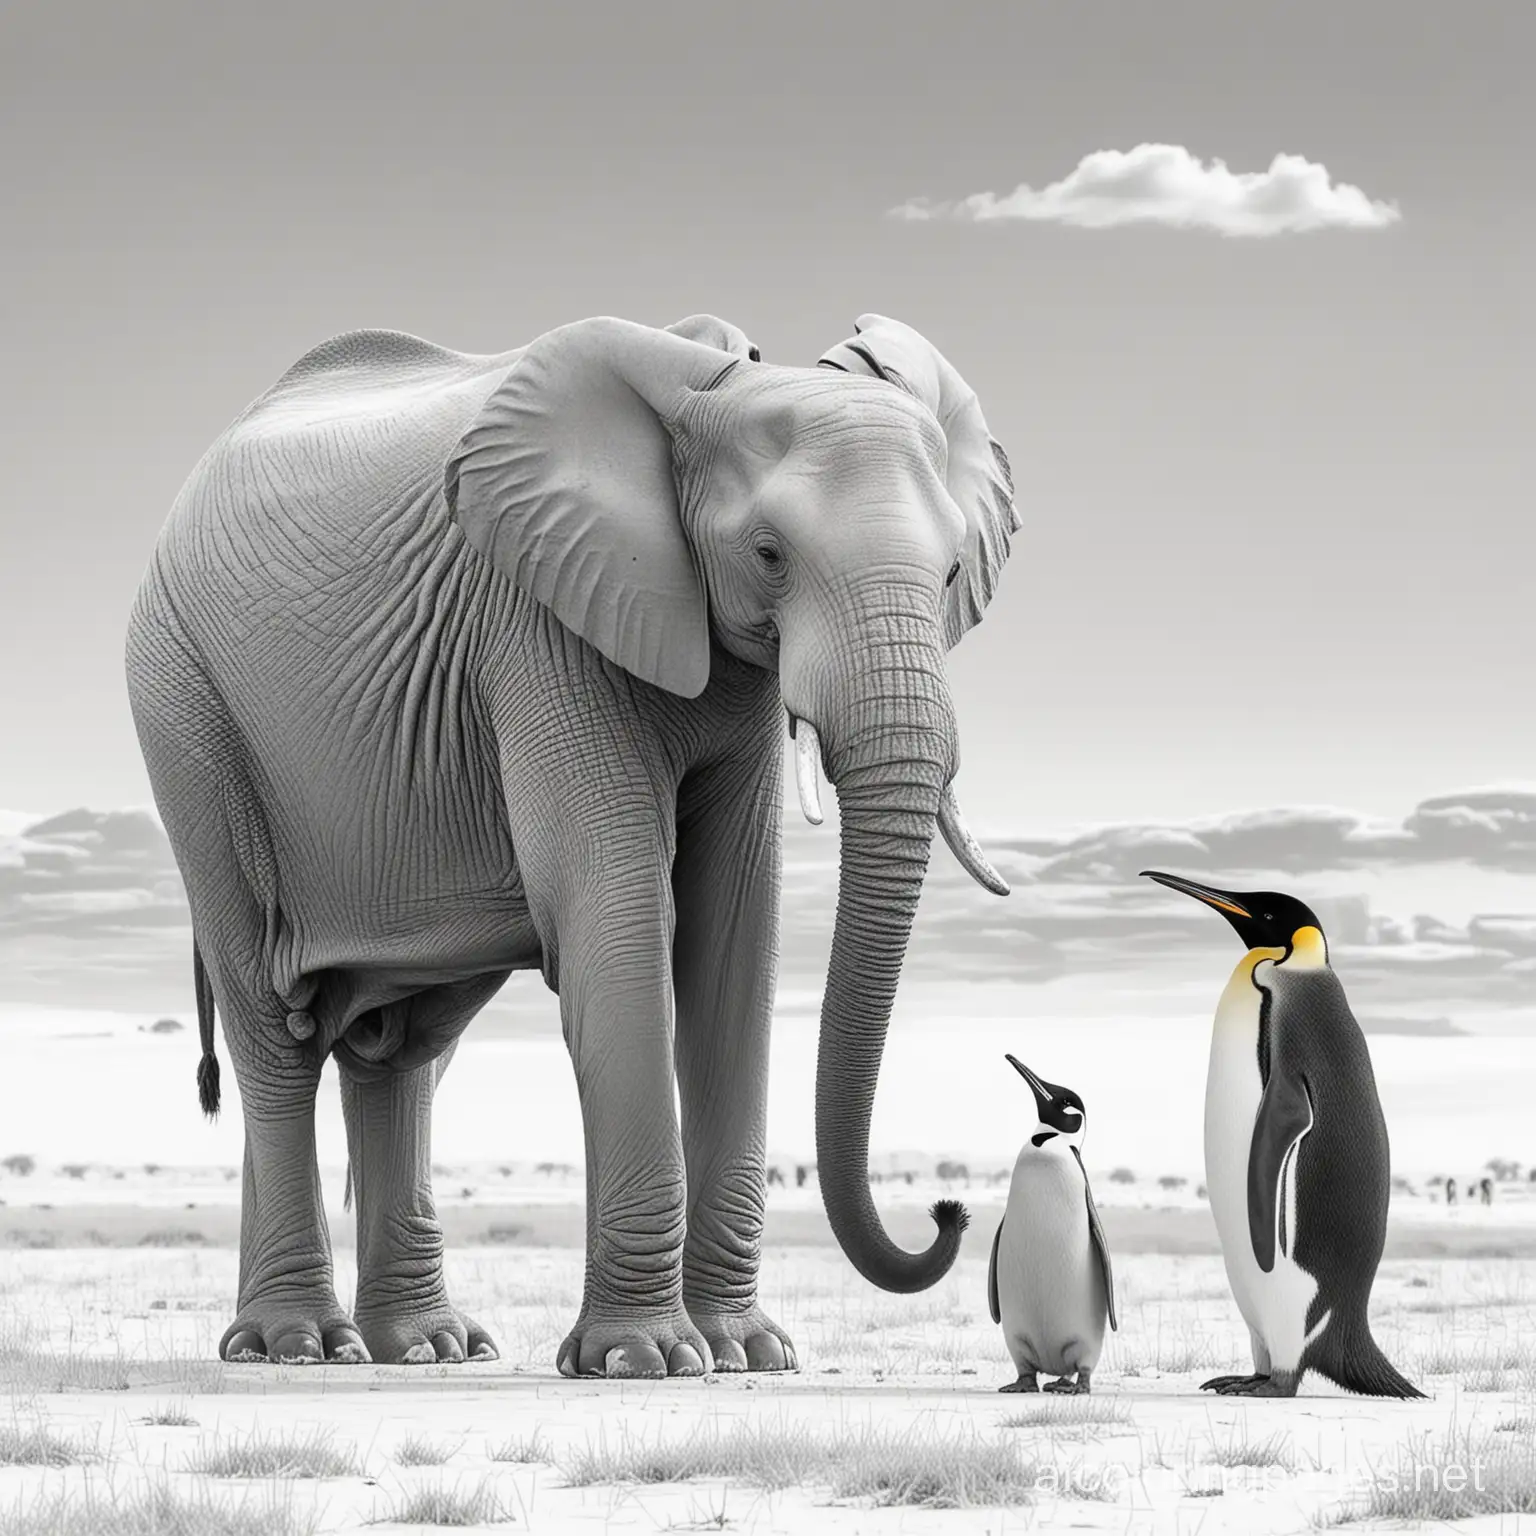 African elephant standing beside 2 emperor penguins on the savanna, Coloring Page, black and white, line art, white background, Simplicity, Ample White Space. The background of the coloring page is plain white to make it easy for young children to color within the lines. The outlines of all the subjects are easy to distinguish, making it simple for kids to color without too much difficulty